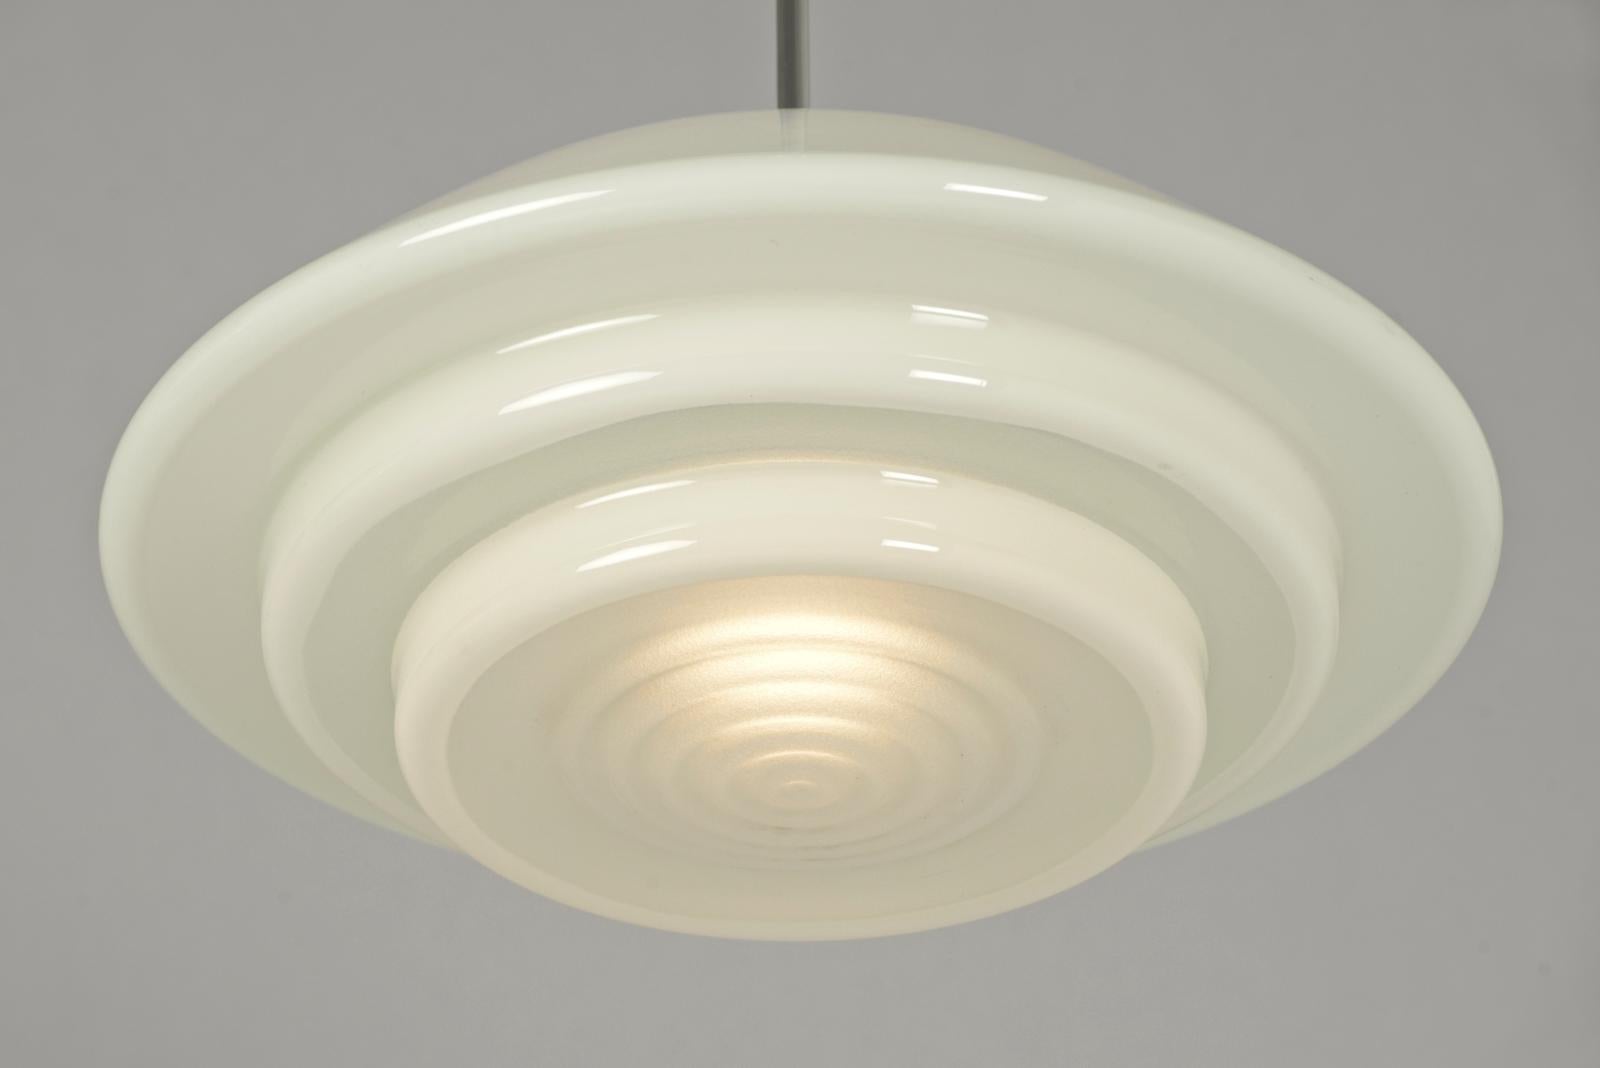 Mid-20th Century Pair of Pendant Lamps in Milk Glass, Germany - 1935 For Sale